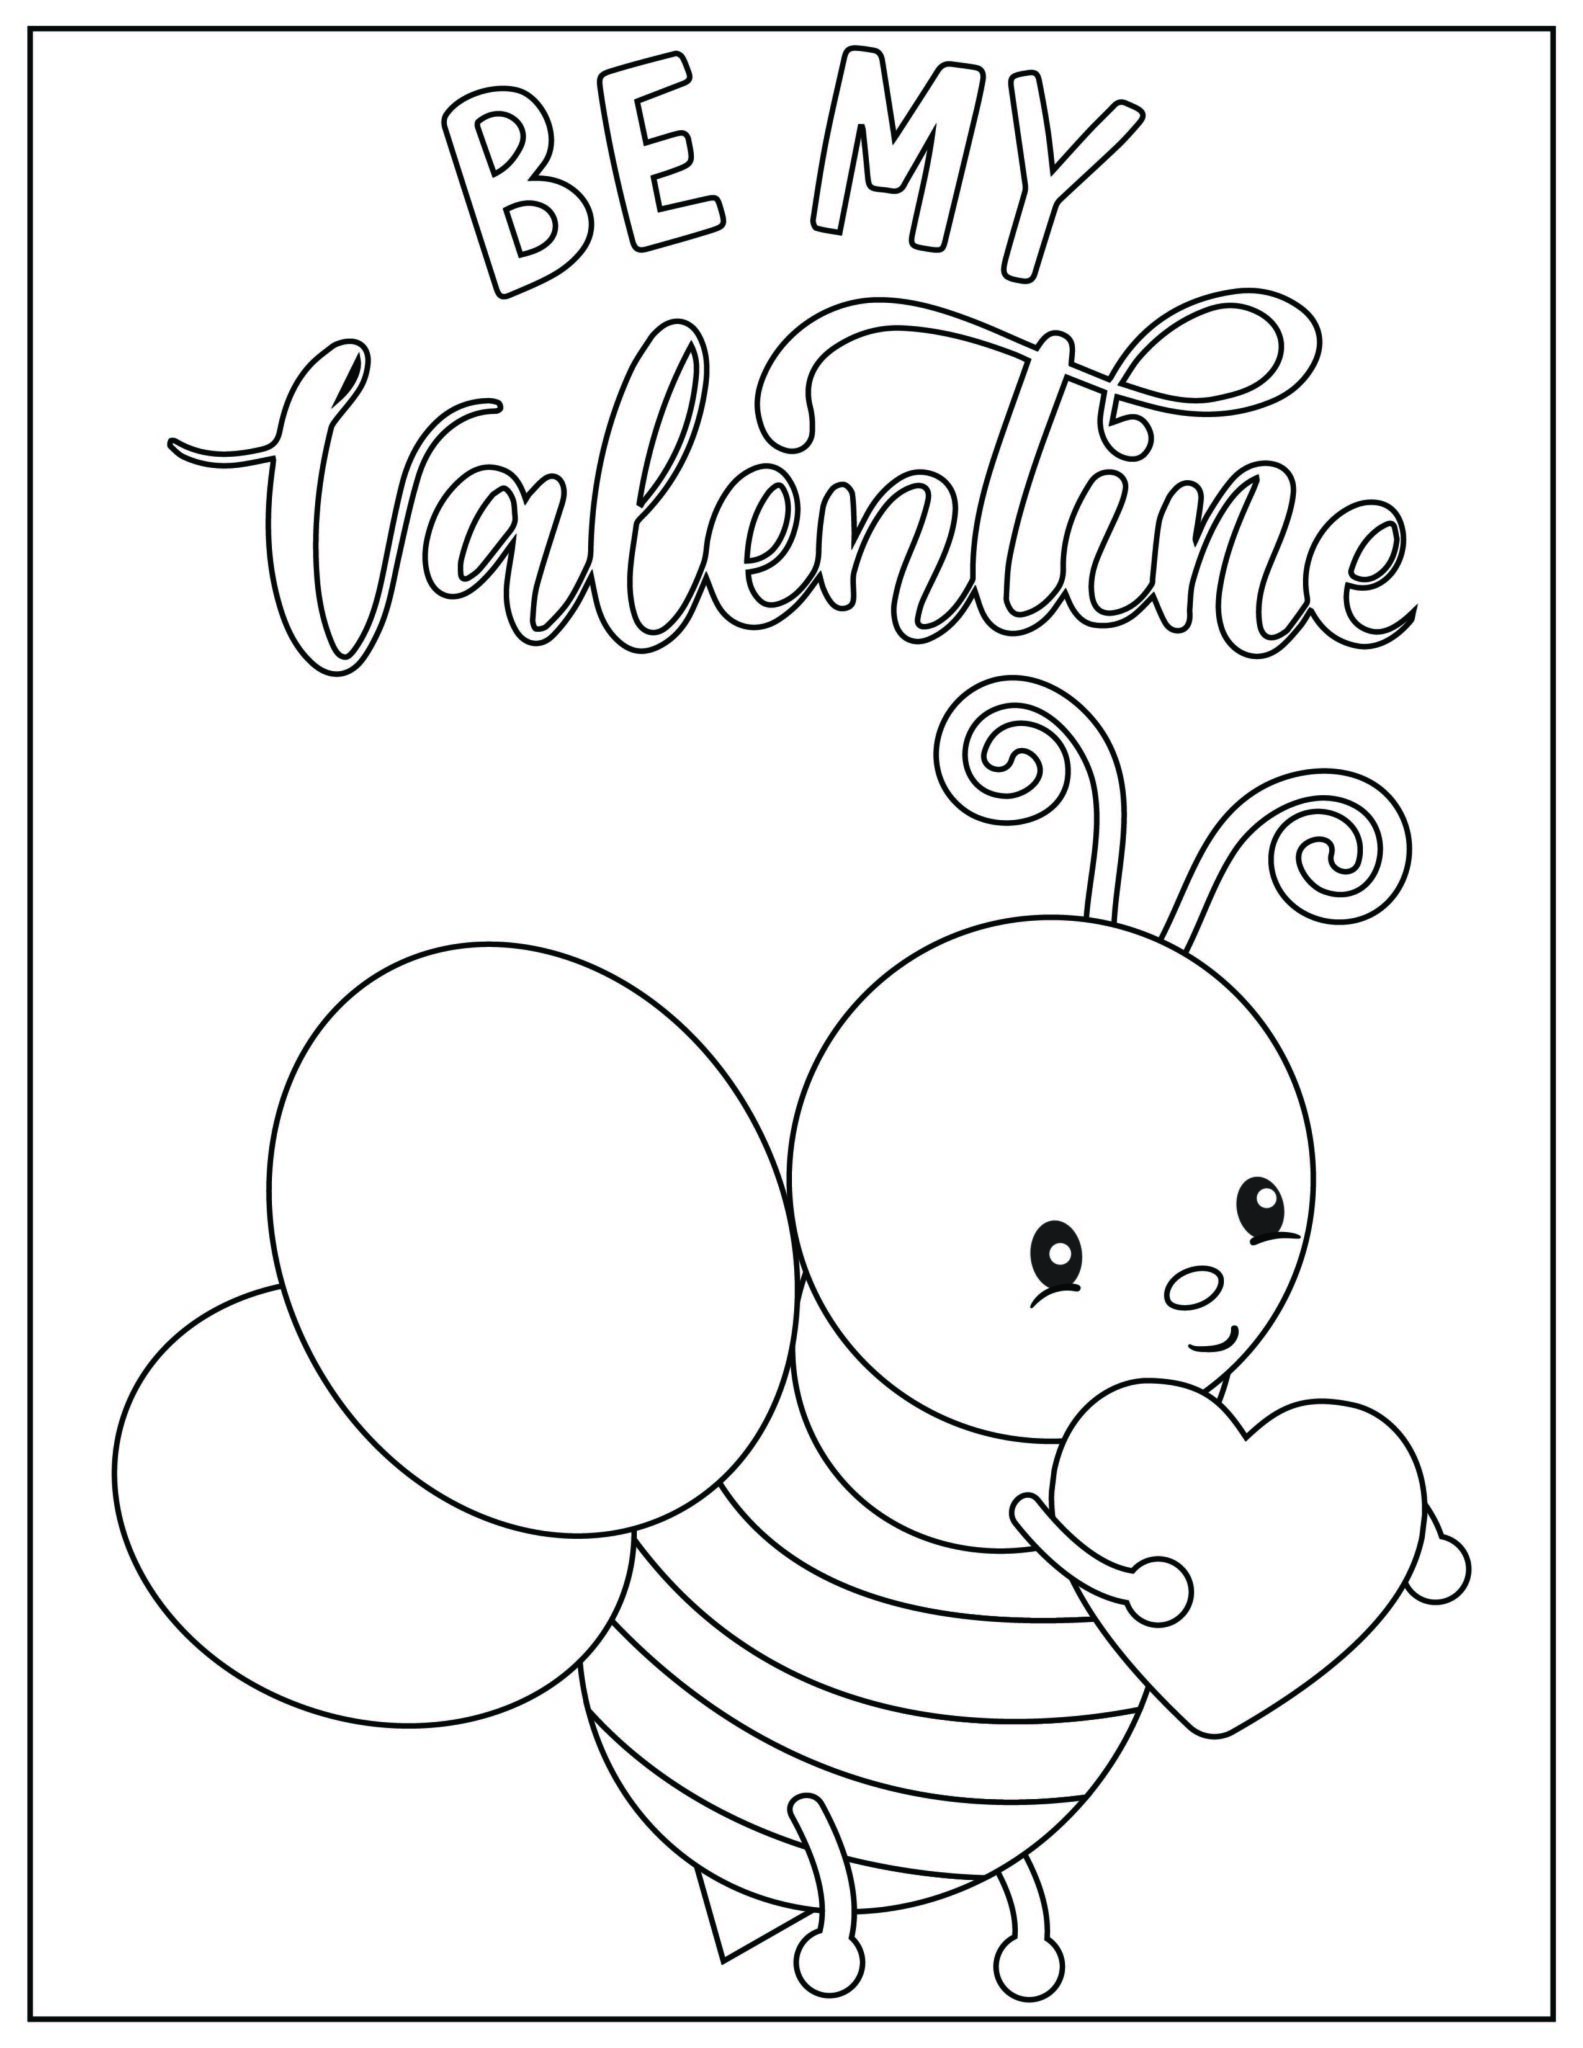 Cute valentines coloring pages